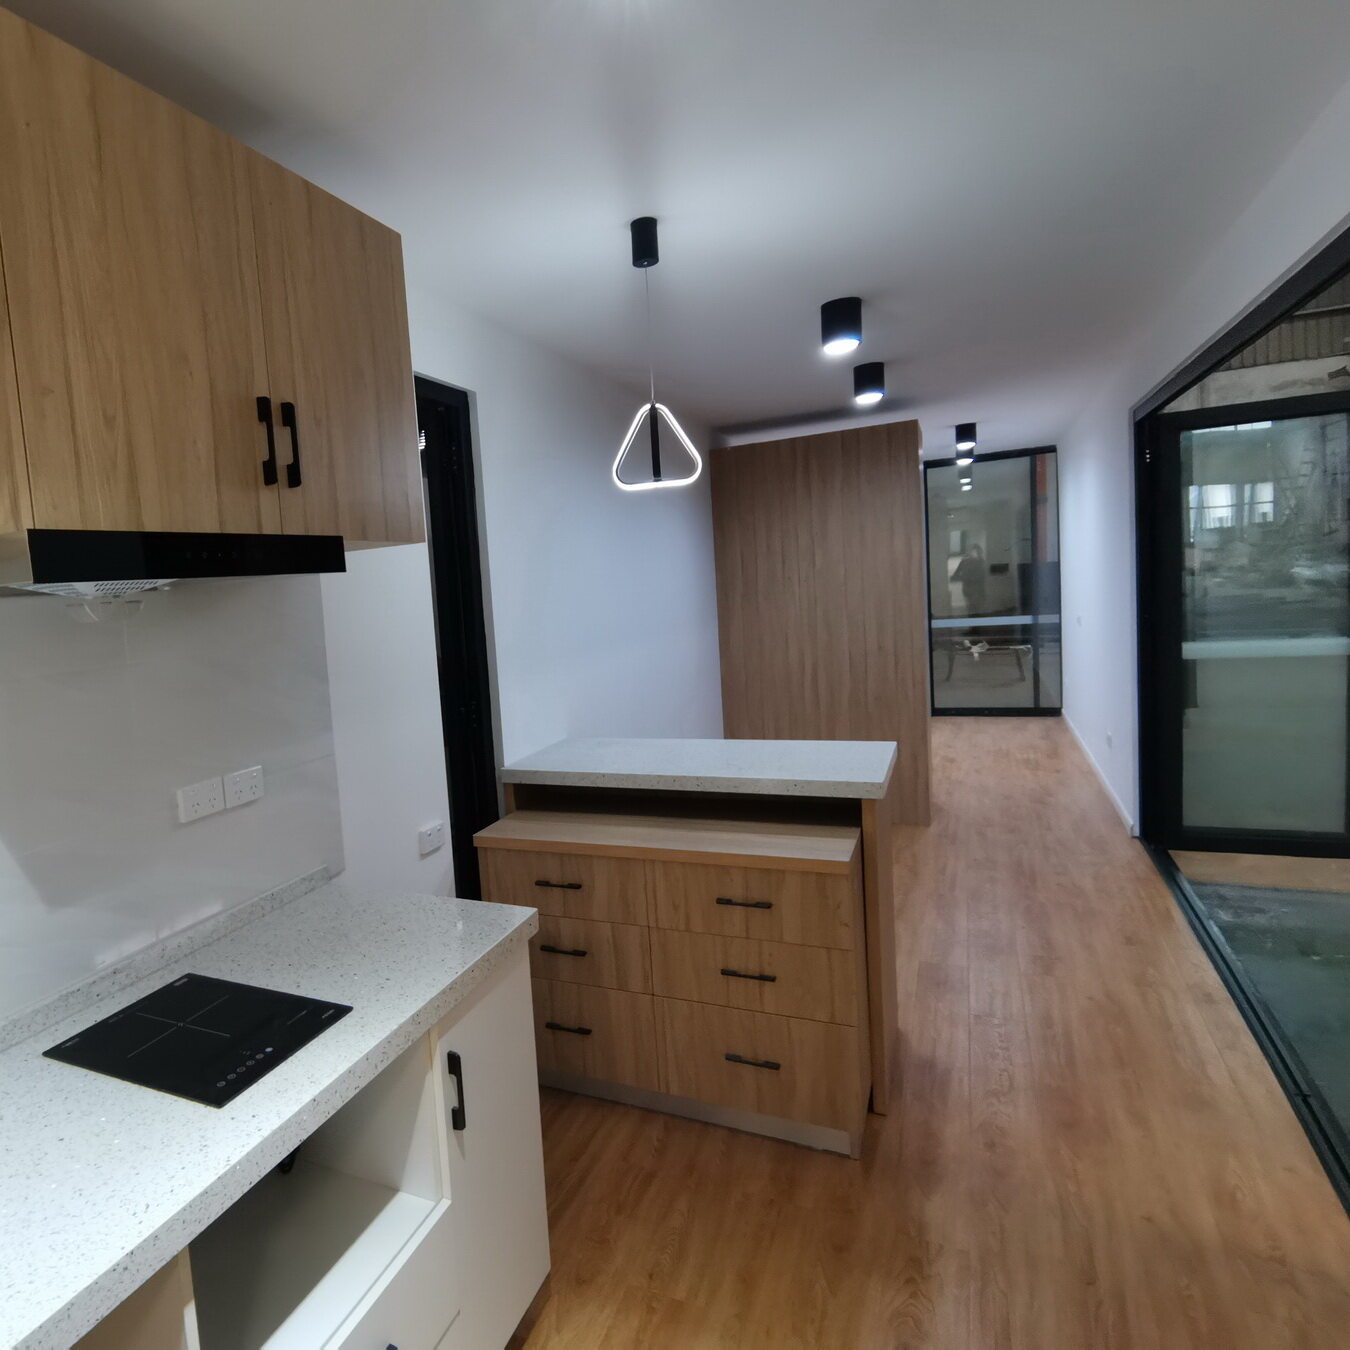 new zealand container home hotel supplier, 40ft container  company, 40ft container  exporte, shipping containers new zealand, shipping containers for sale new zealand